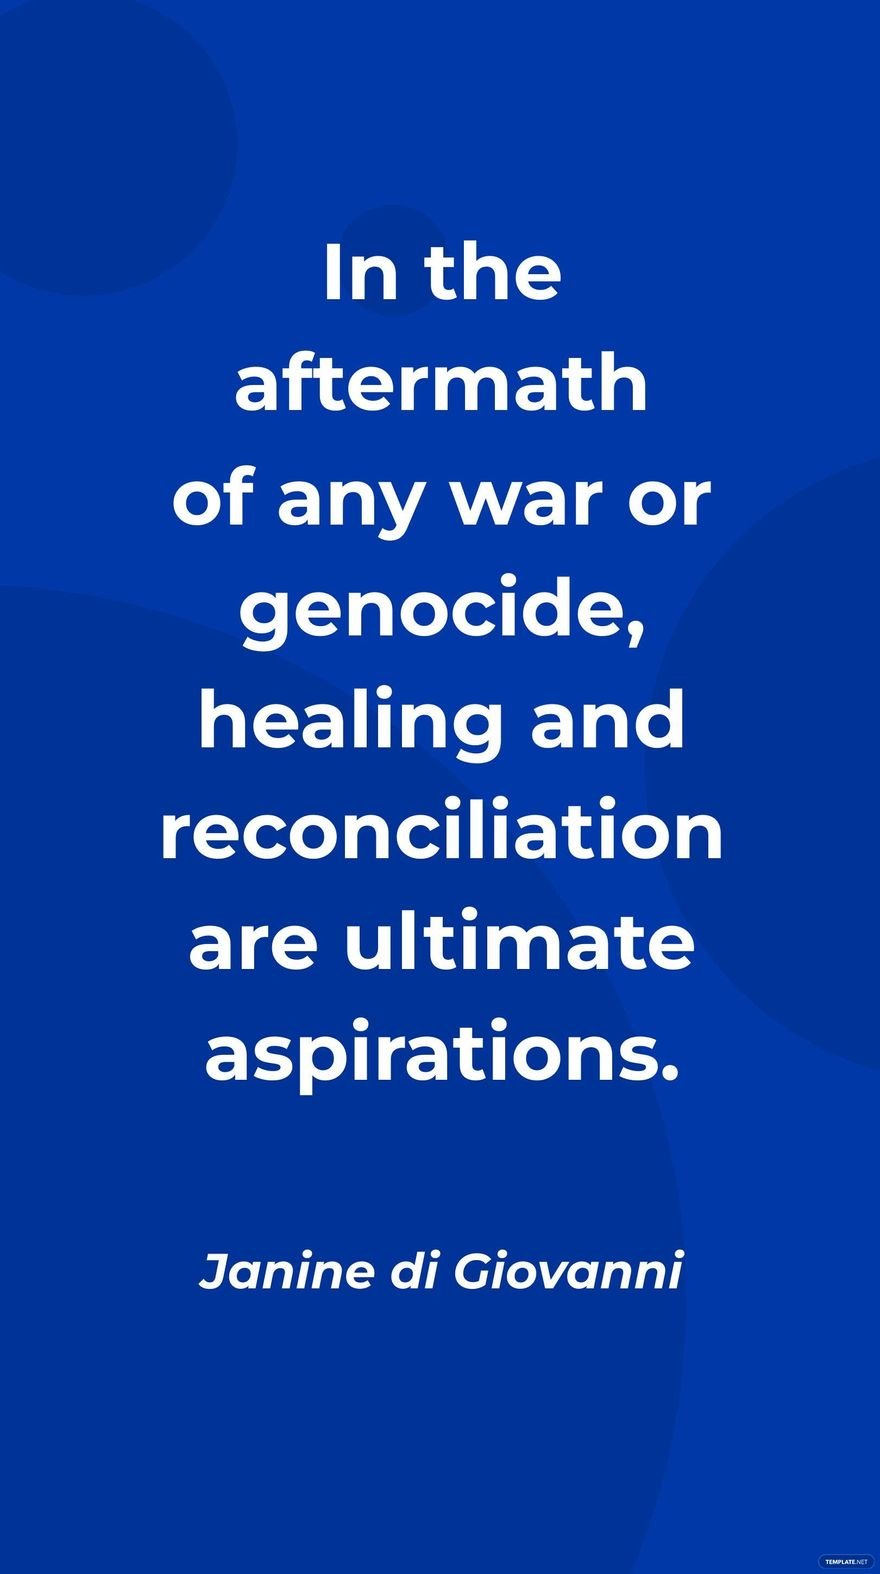 Janine di Giovanni - In the aftermath of any war or genocide, healing and reconciliation are ultimate aspirations.